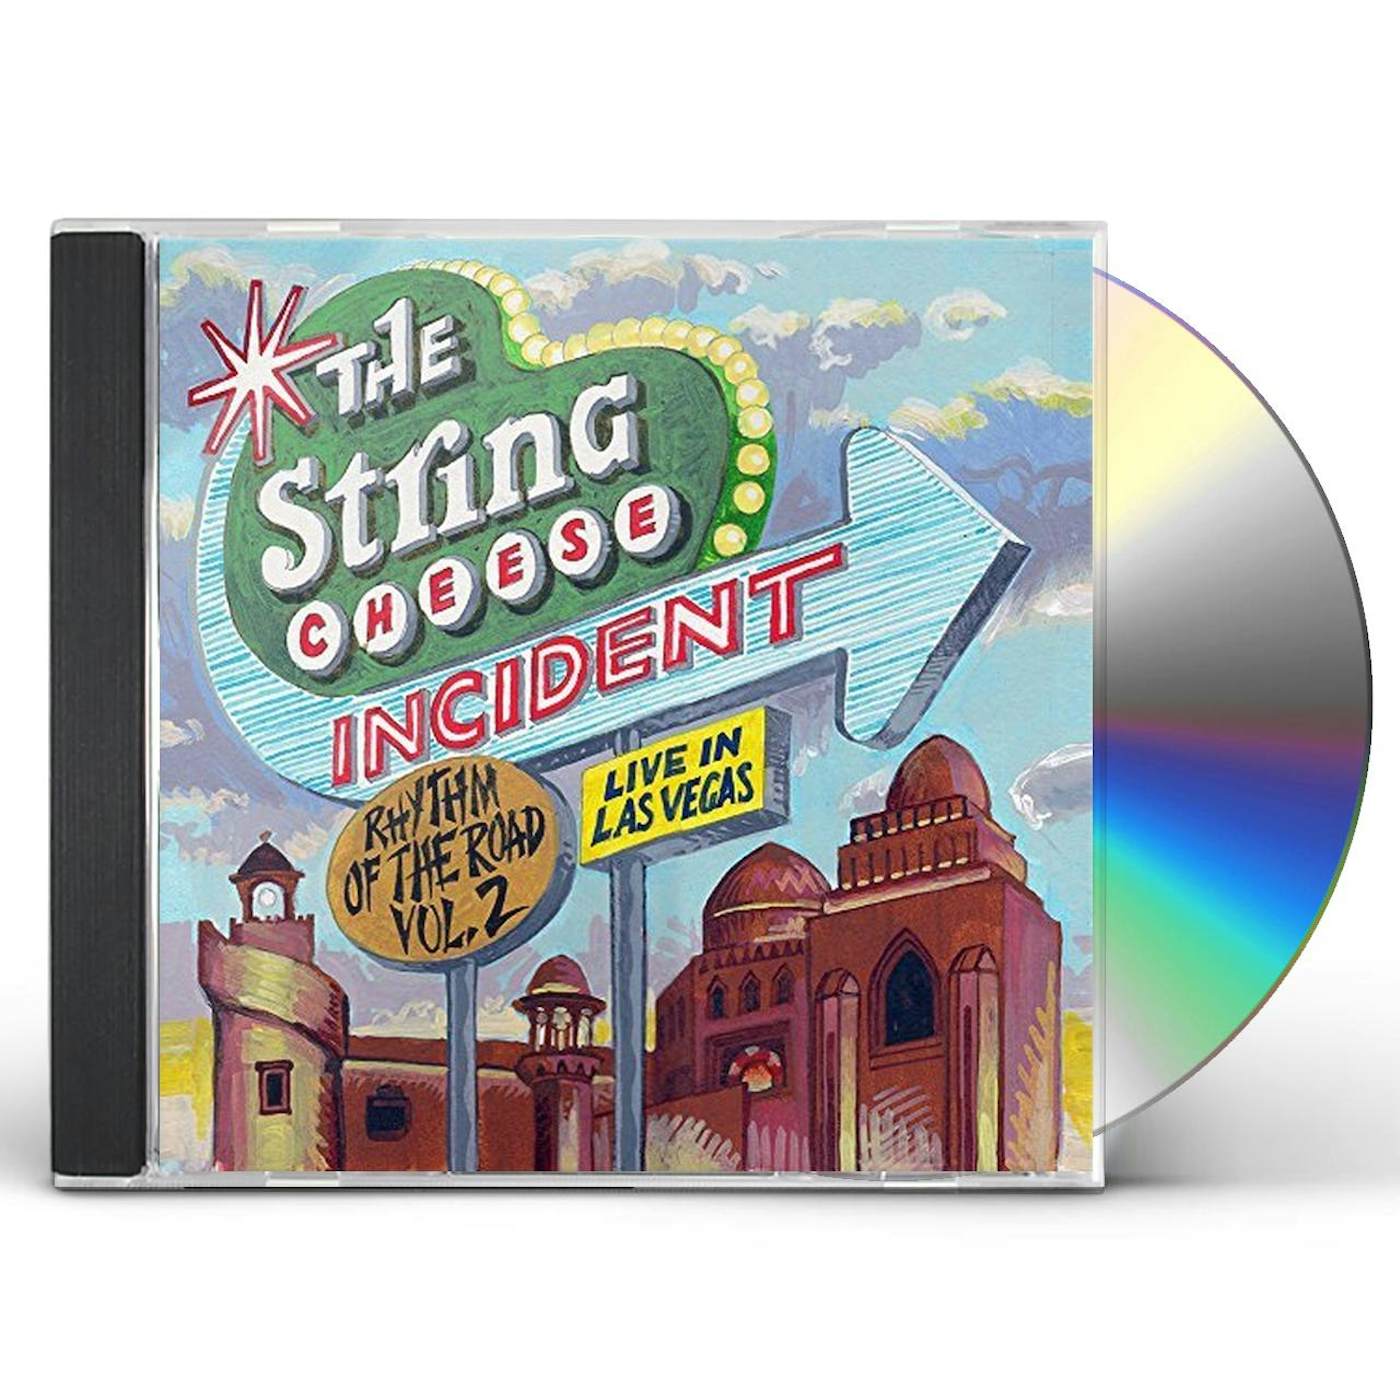 The String Cheese Incident RHYTHM OF THE ROAD 2: LAS VEGAS CD